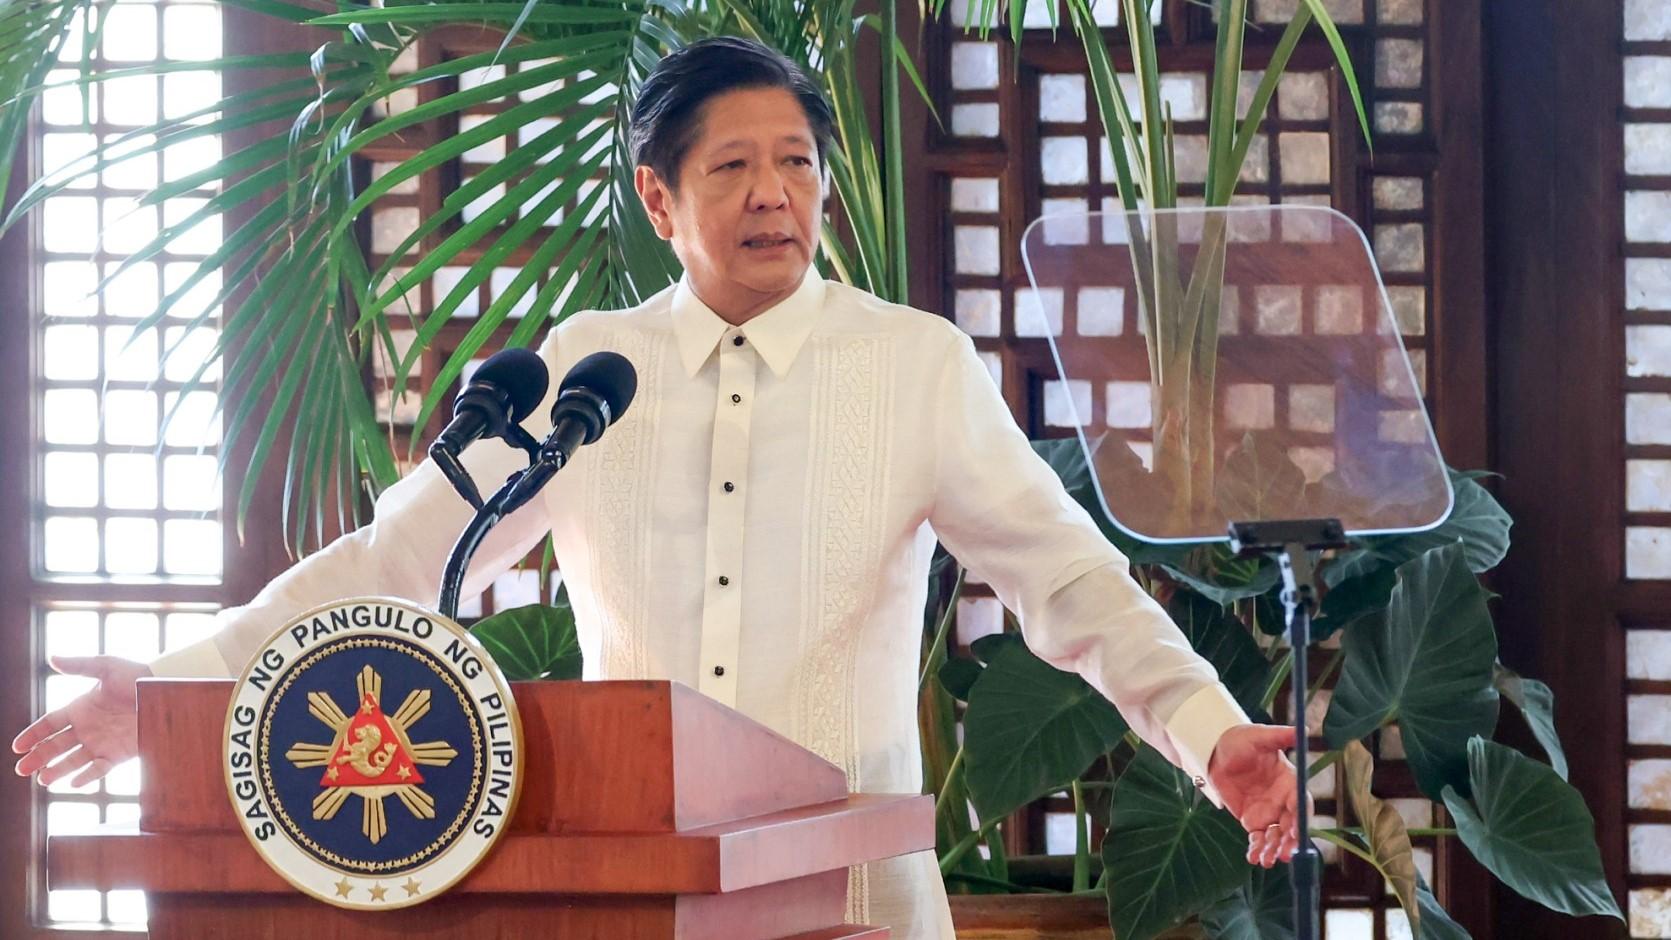 President Ferdinand Marcos Jr. donated P150 million for the procurement of a Magnetic Resonance Imaging (MRI) machine.